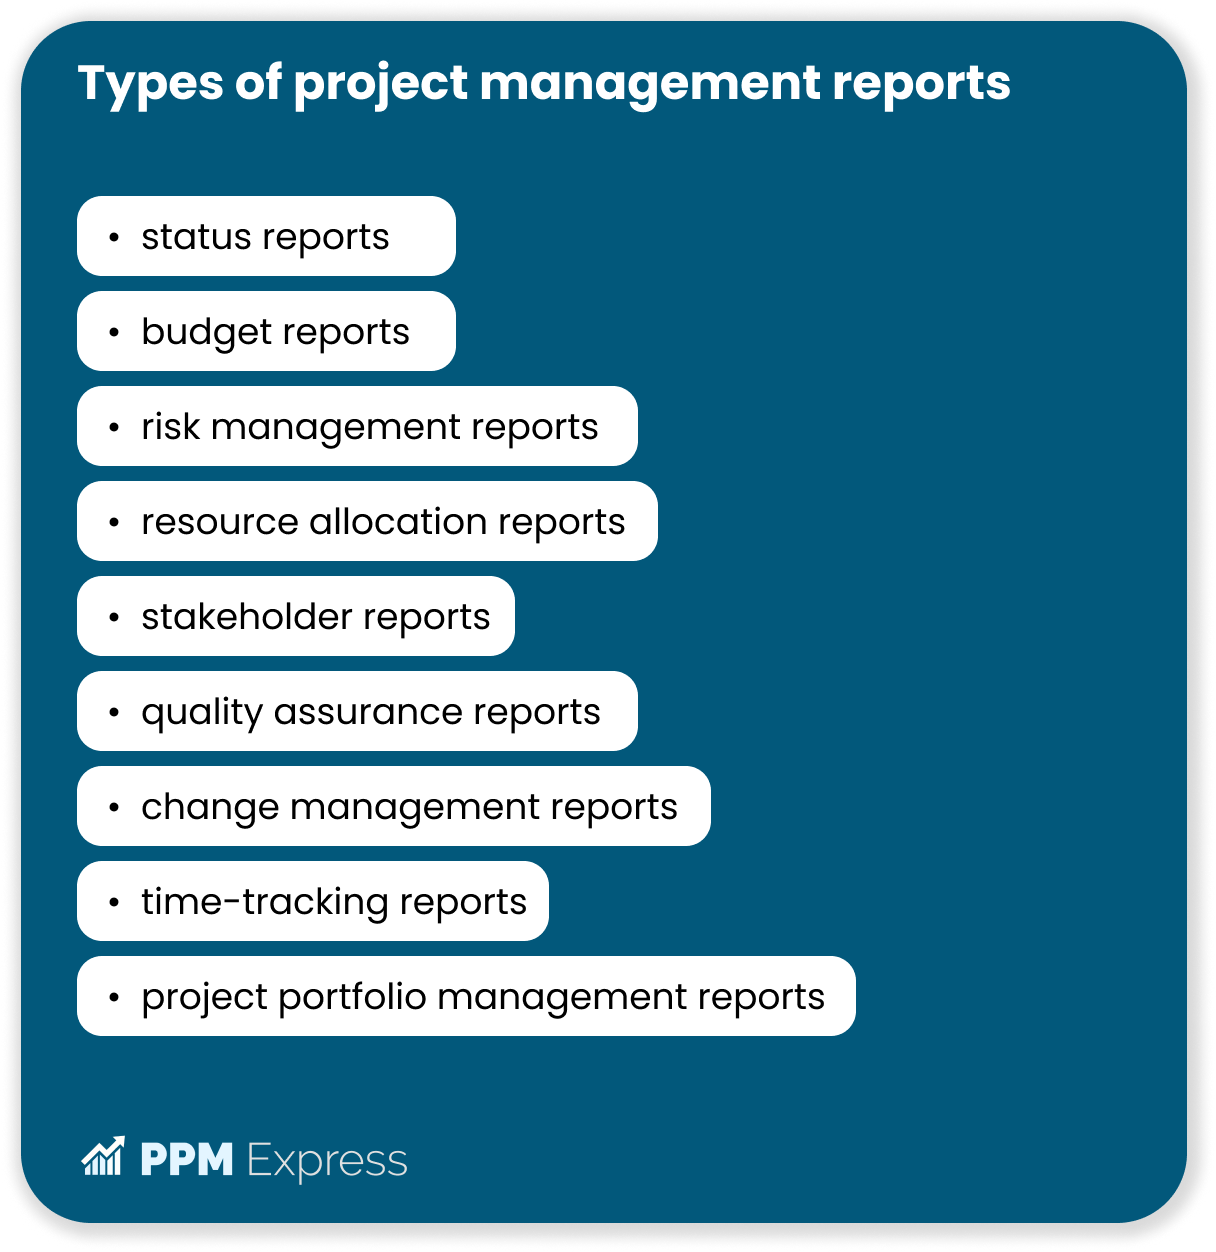 Types of project reports